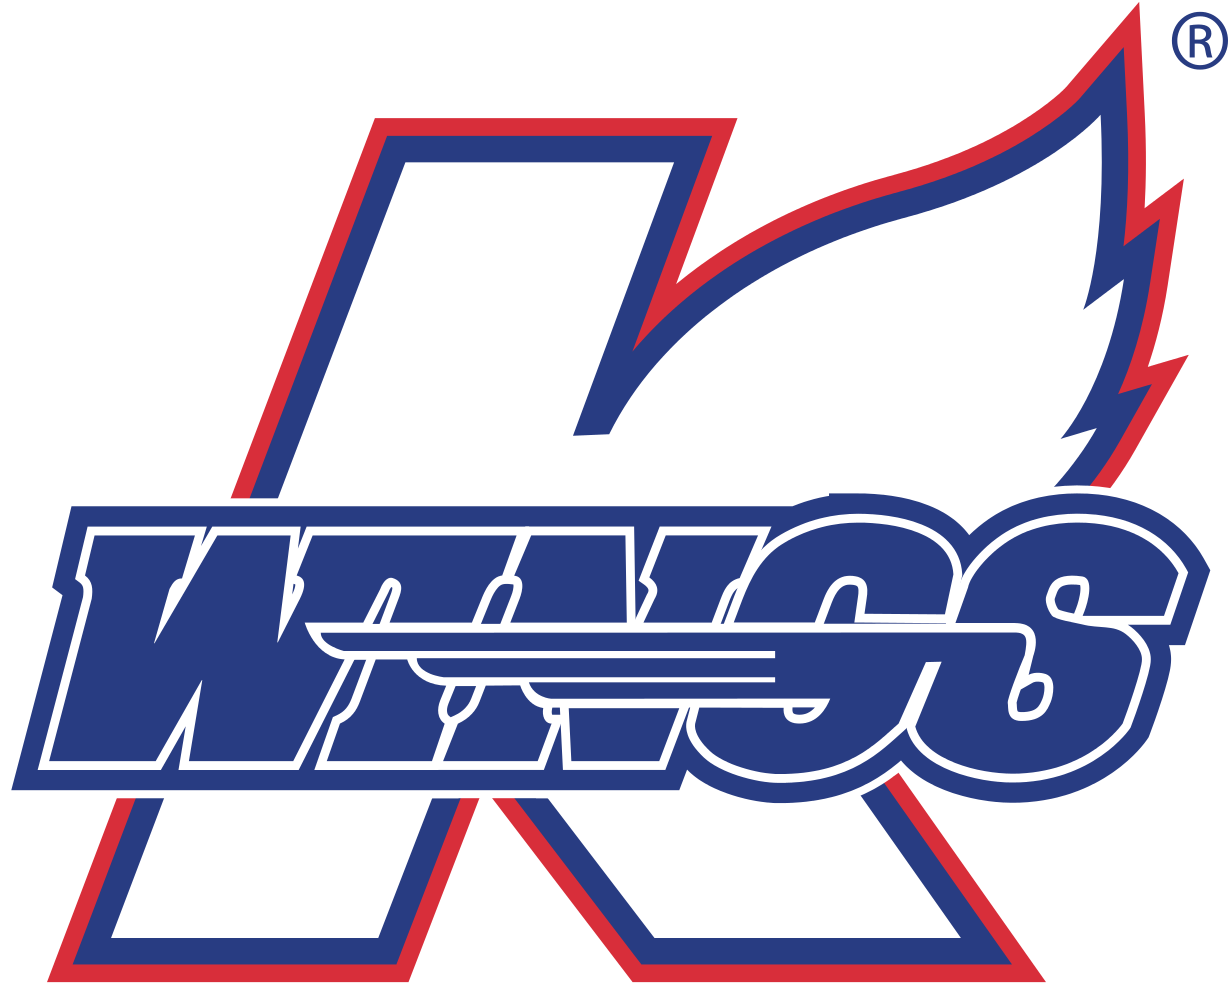 In Collecting 100 Personal Care Items Include The Following - Kalamazoo Wings Logo (1280x1024)